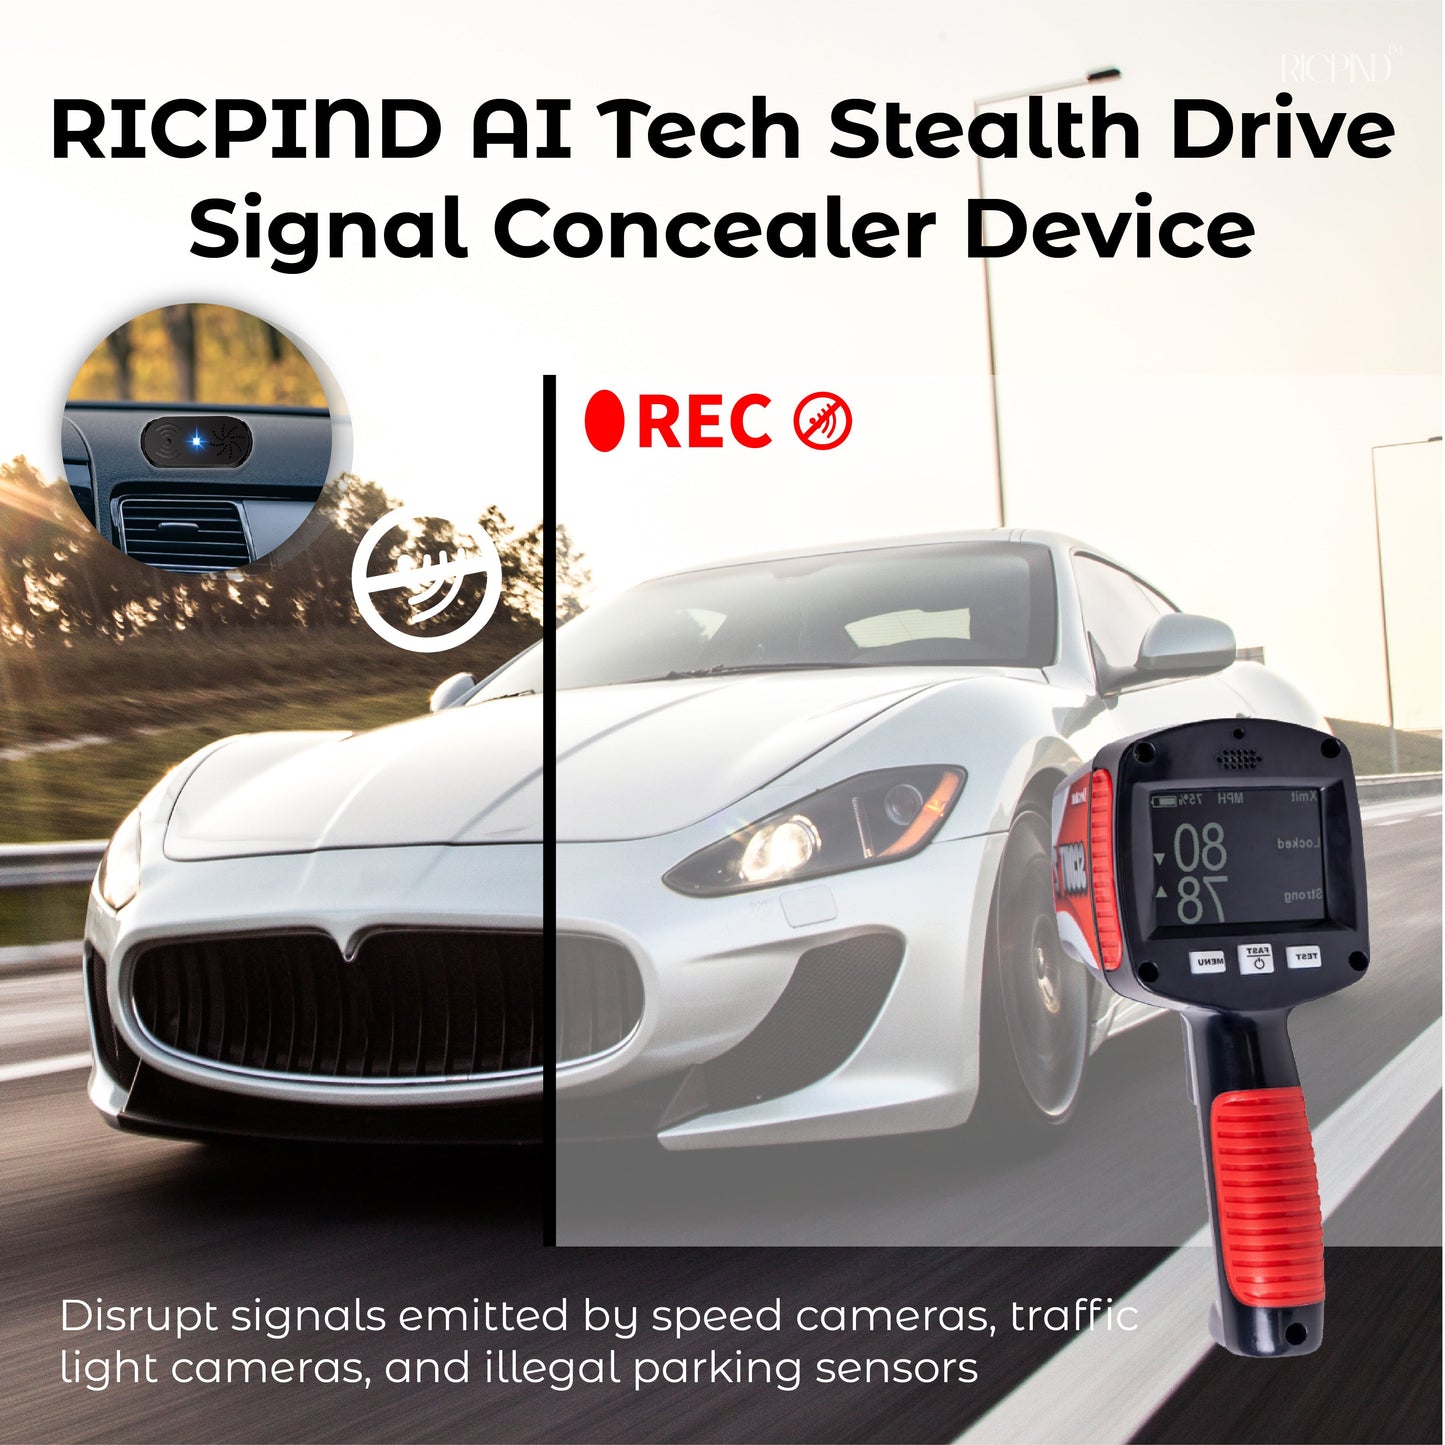 RICPIND 2 AI Tech Stealth Drive Signal Concealer Device